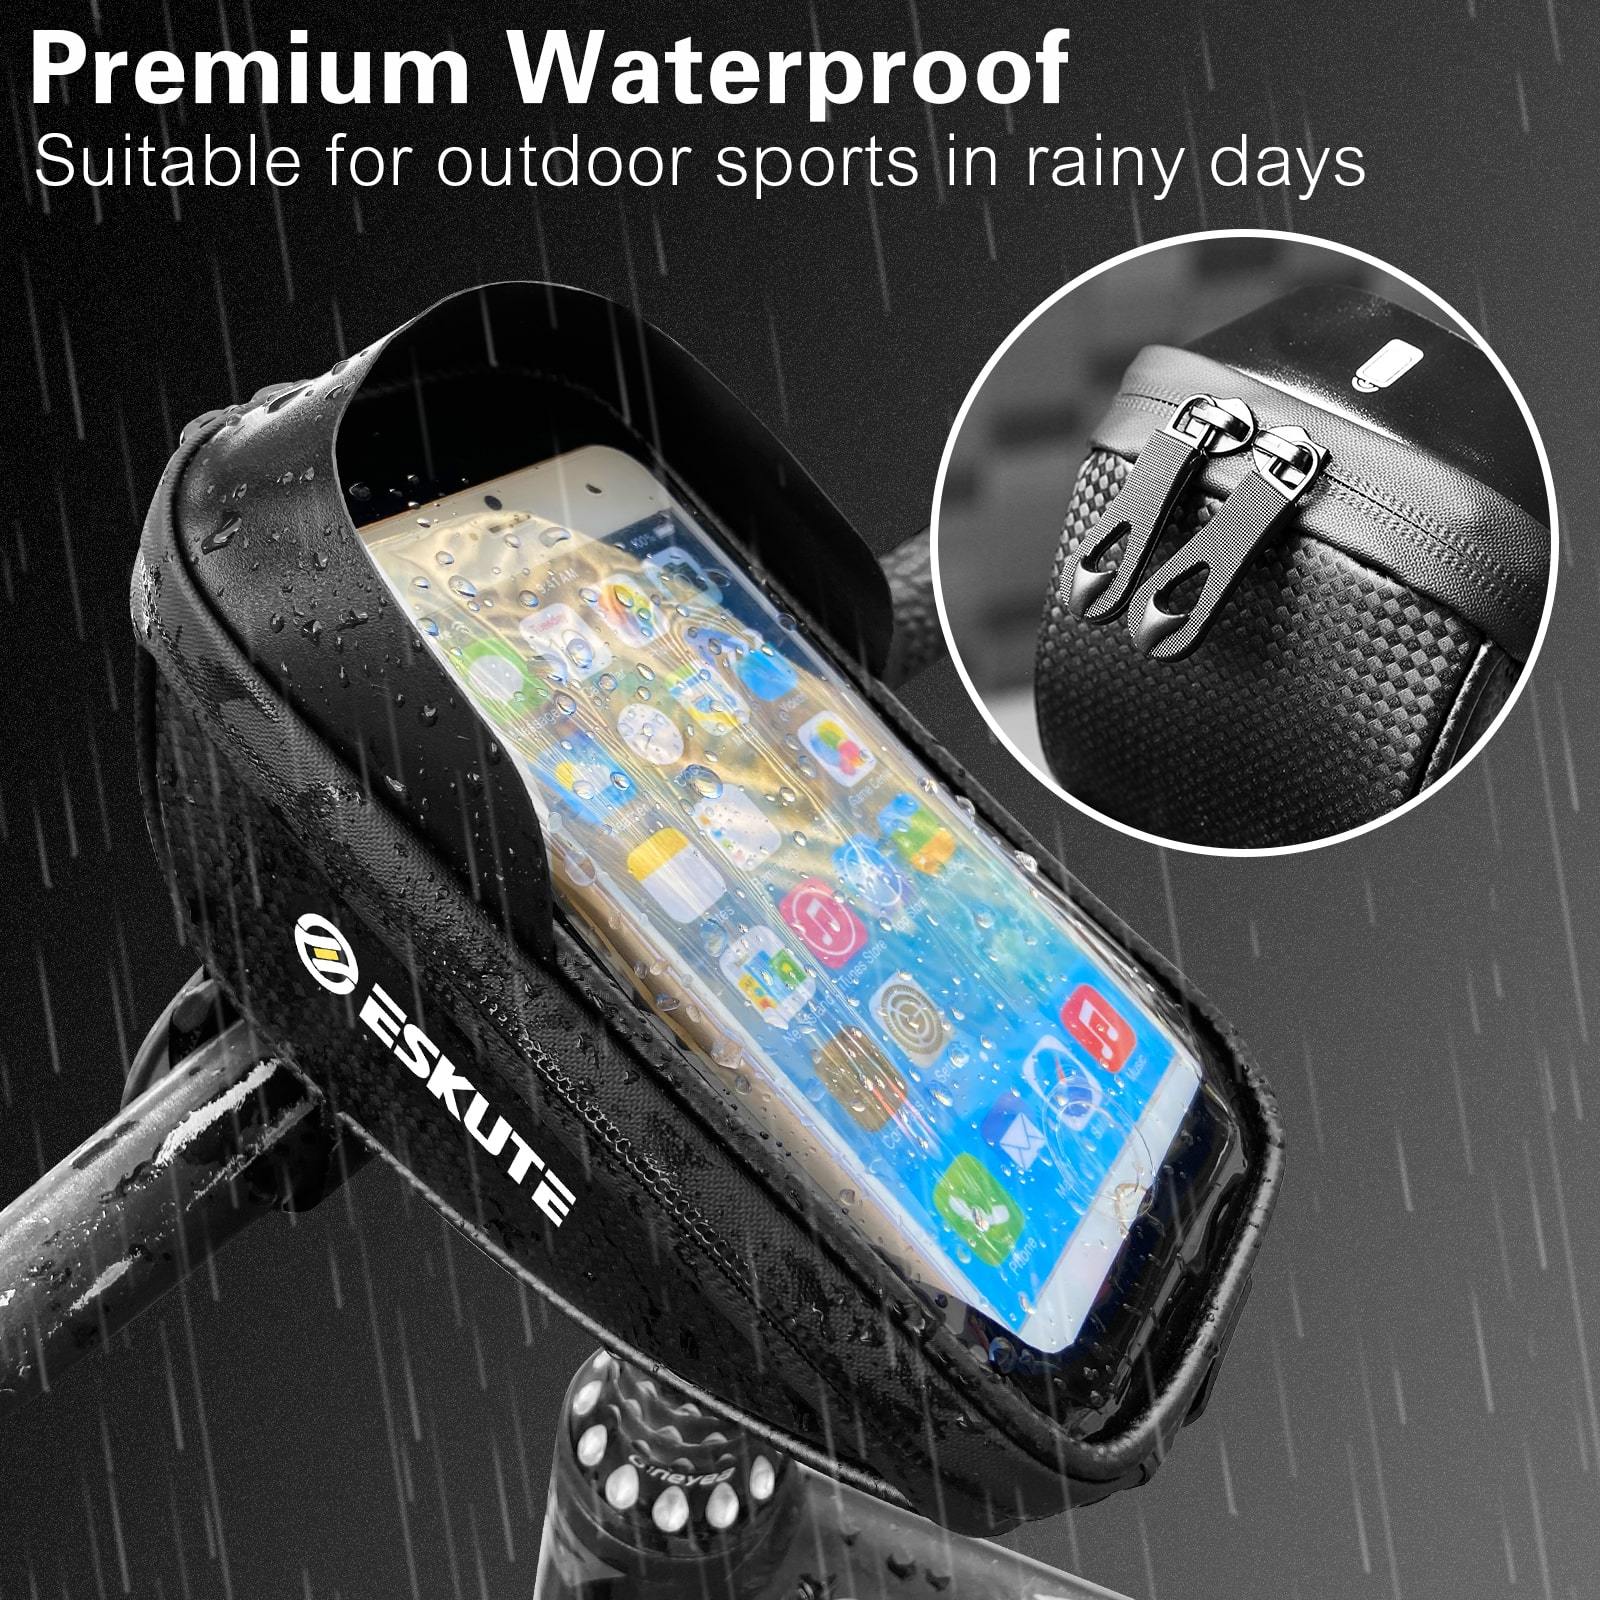 waterproof bike frame bag for outdoor sports in rainy days 